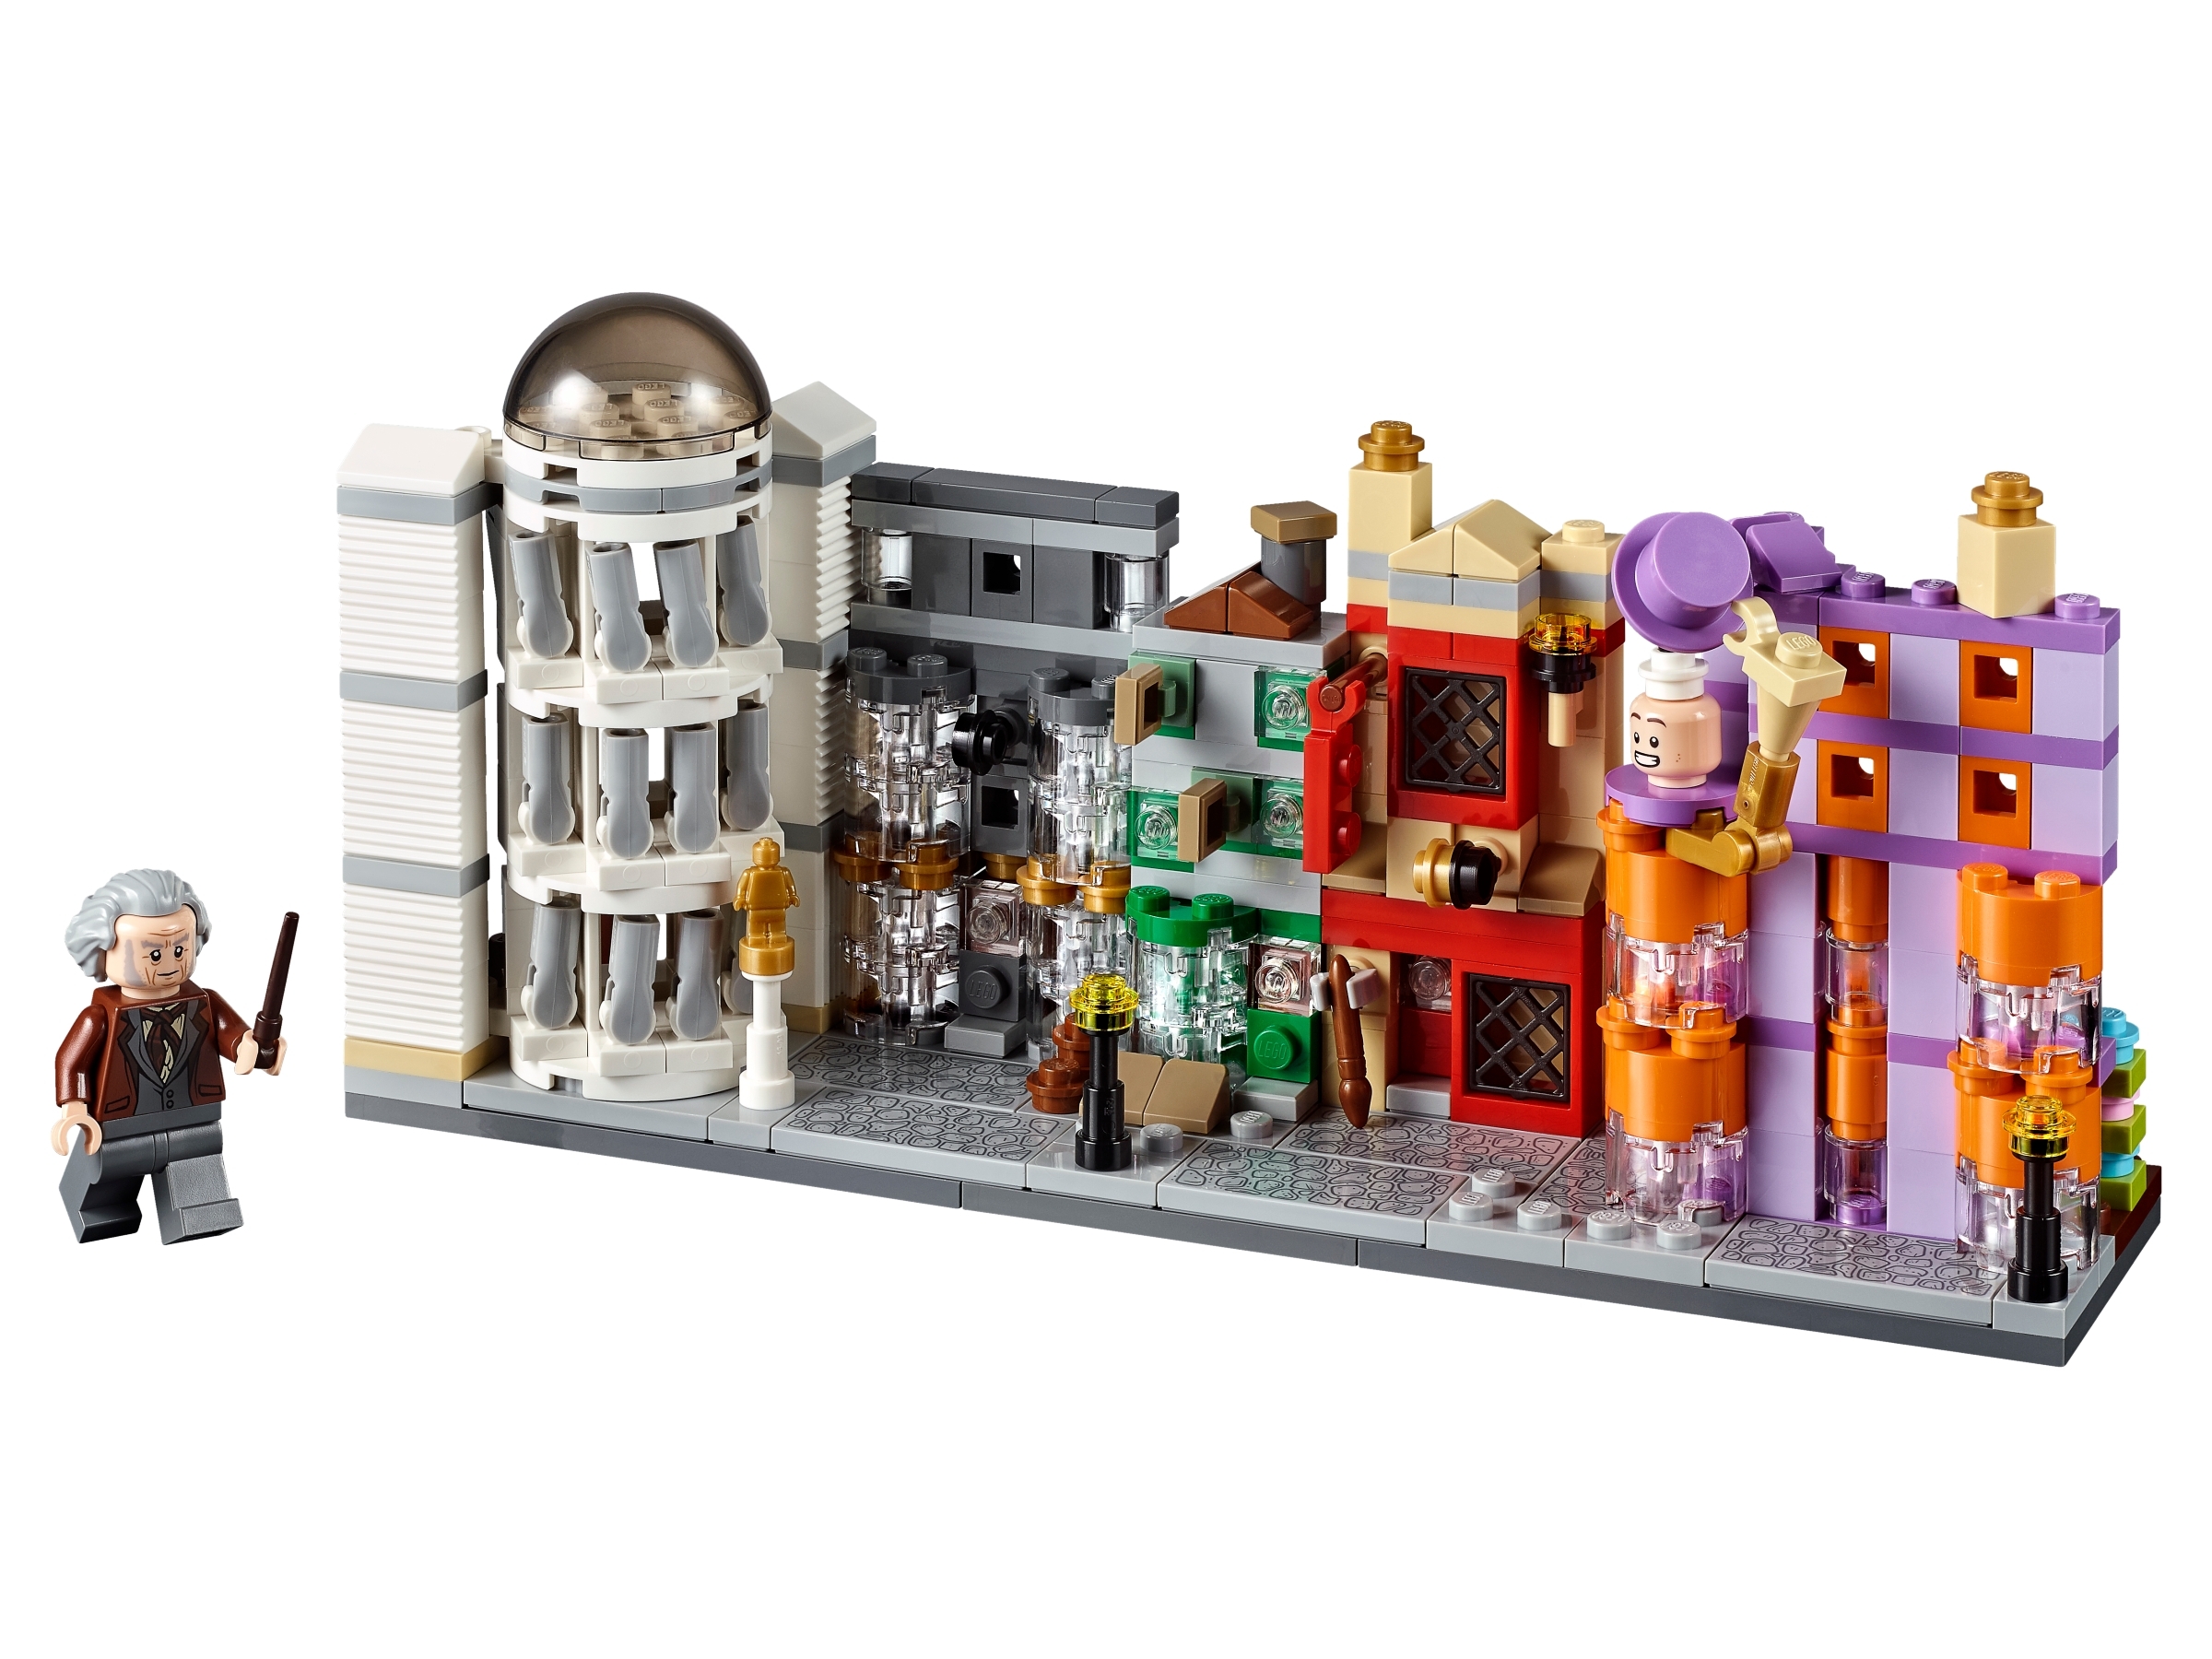 Diagon Alley 40289 Harry Potter Buy Online At The Official Lego Shop Us